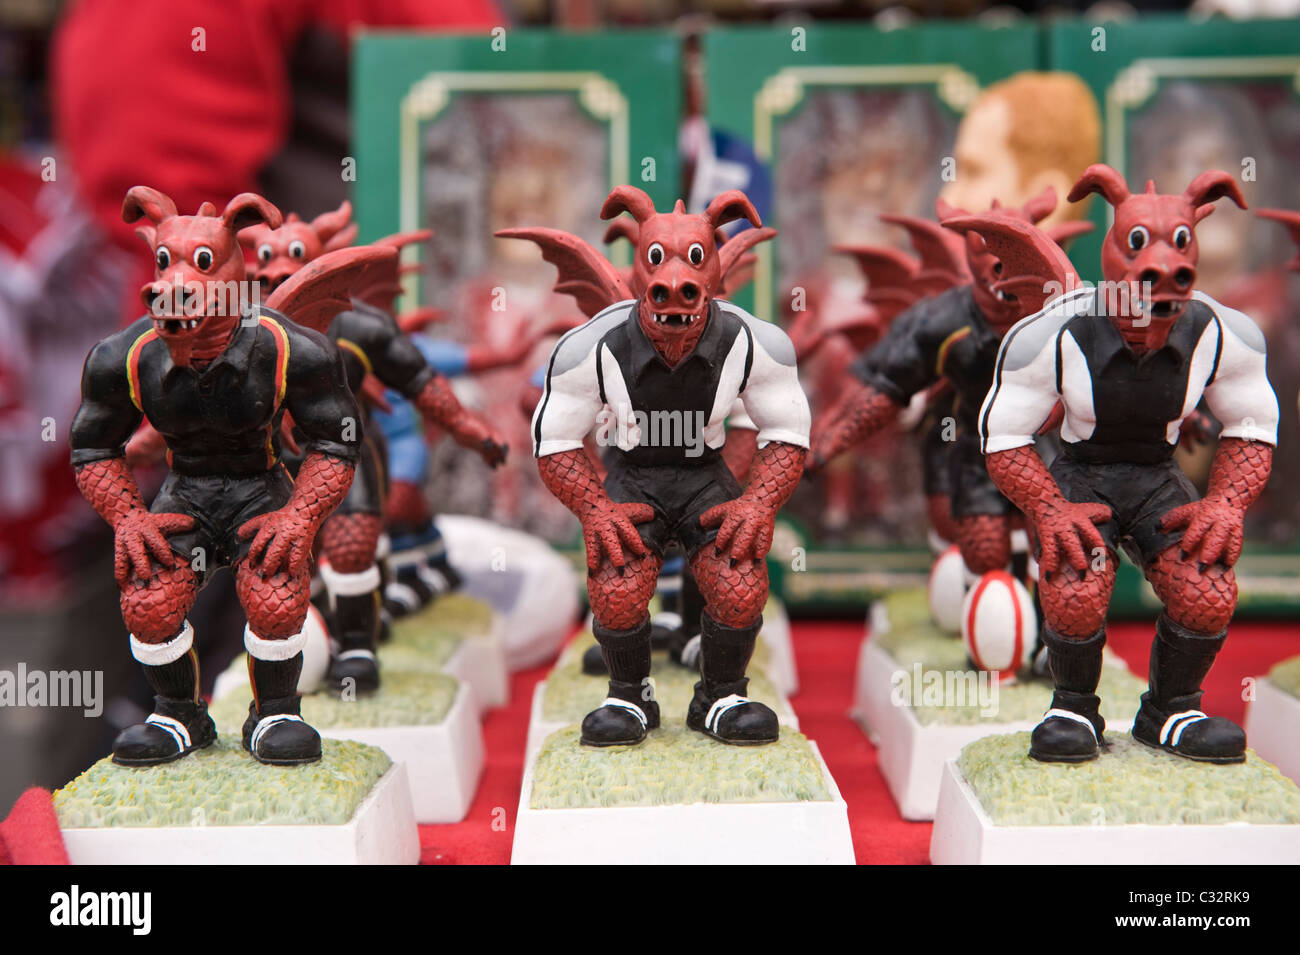 Ceramic souvenir rugby dragons for sale at National Eisteddfod 2010 Ebbw Vale Blaenau Gwent South Wales UK Stock Photo